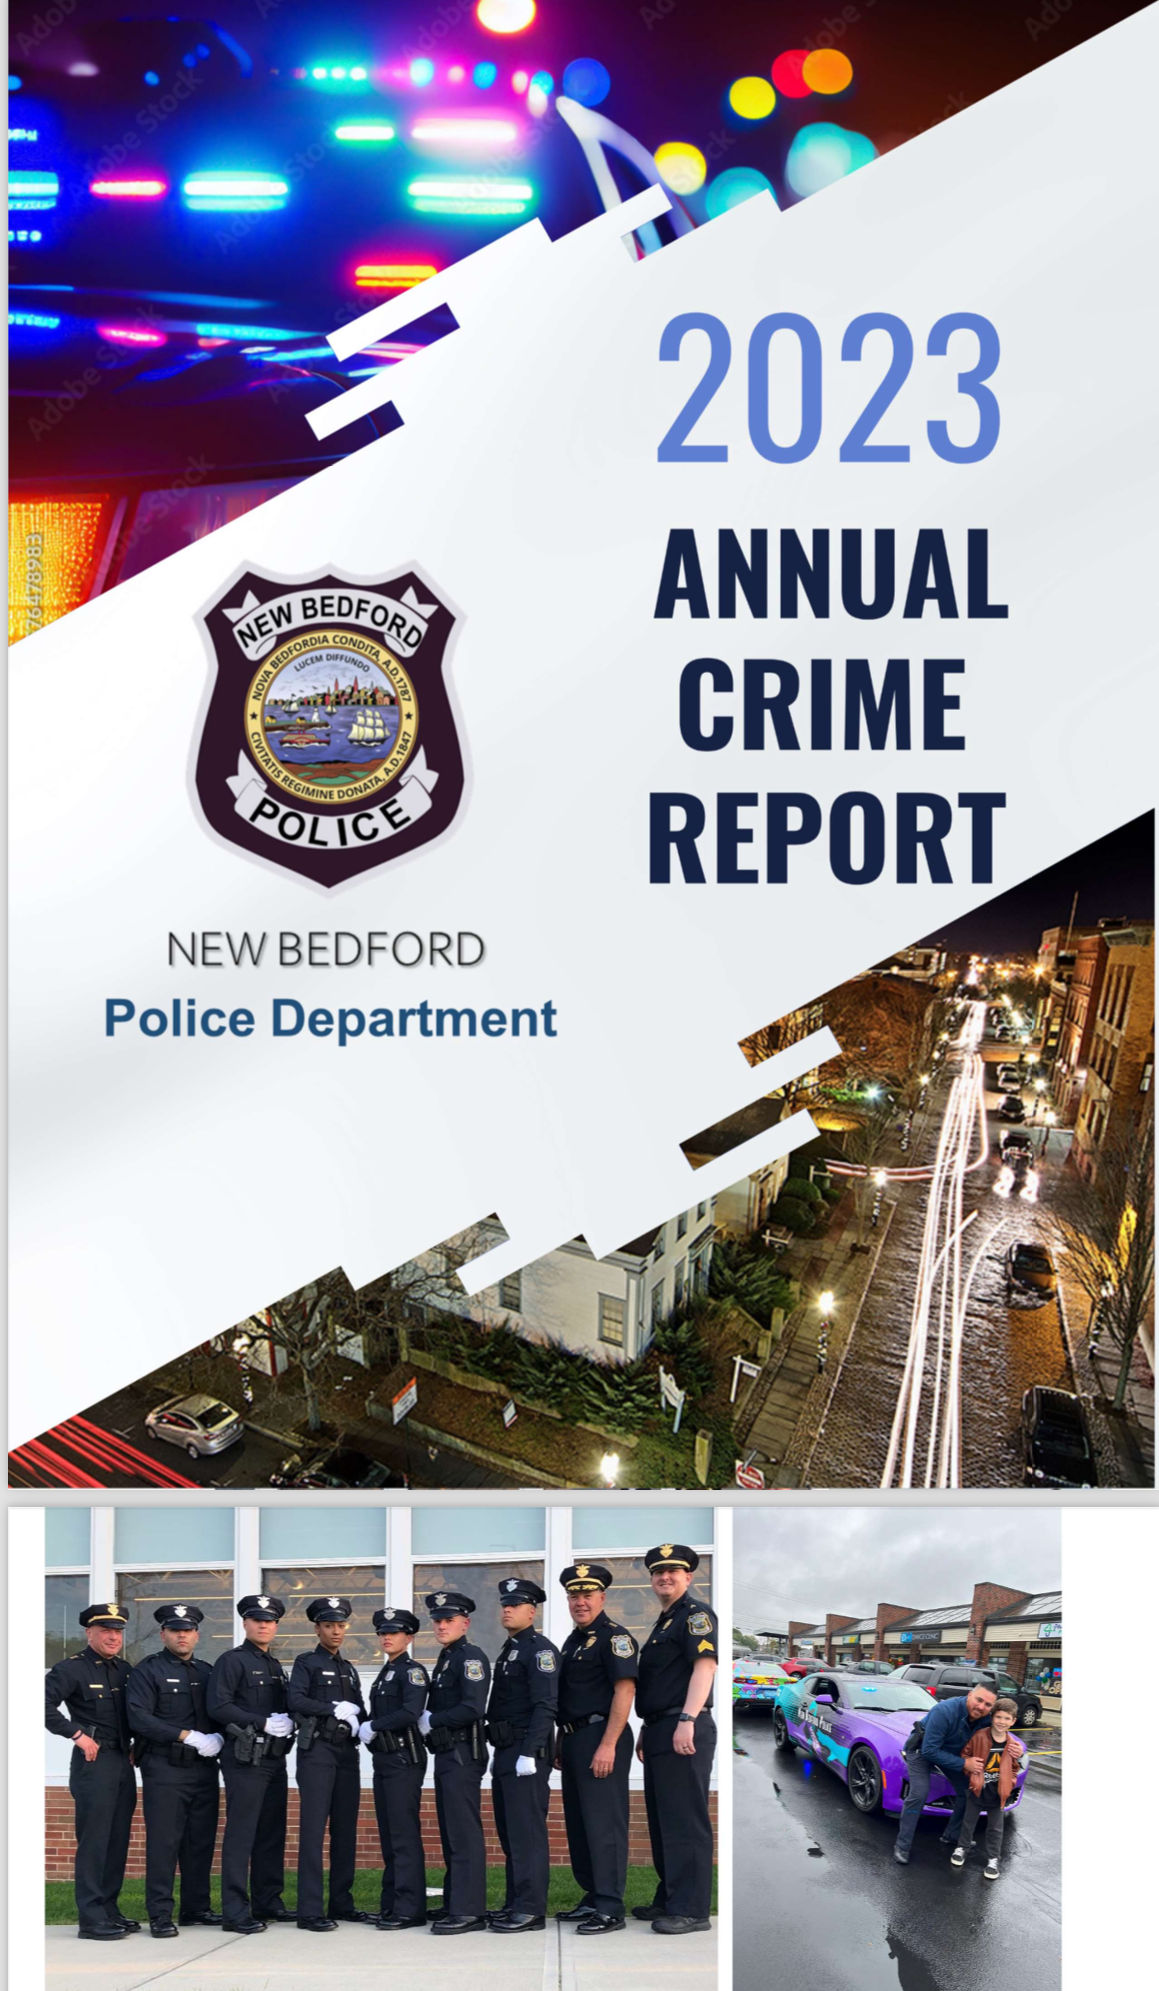 The report provides the numbers in various categories from each of the past five years. Categories range from arsons to traffic stops to domestic assaults to fatal overdoses.